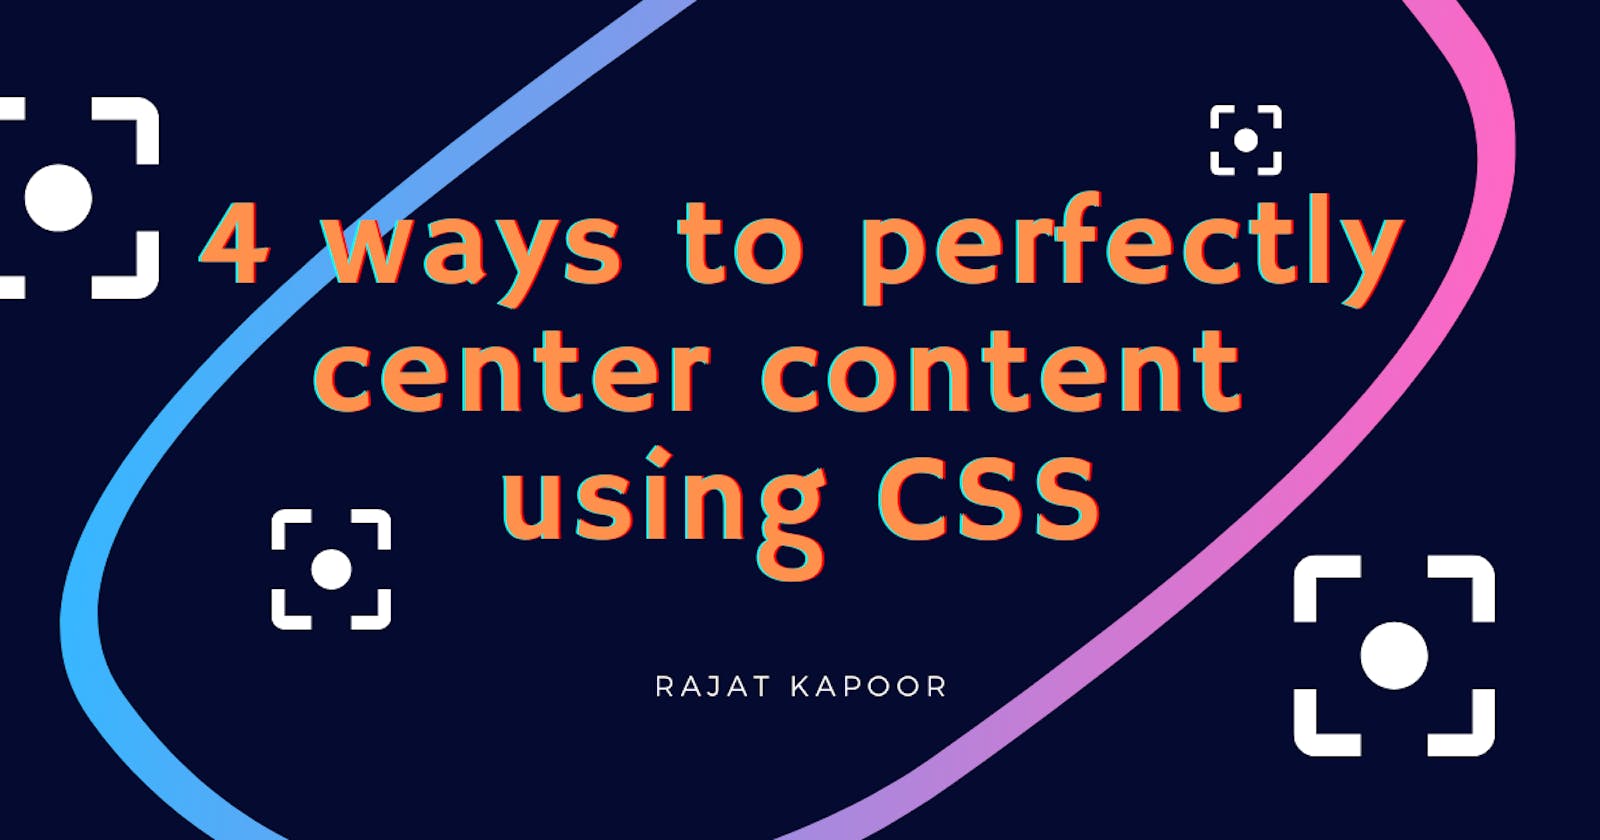 4 ways to perfectly center content using CSS